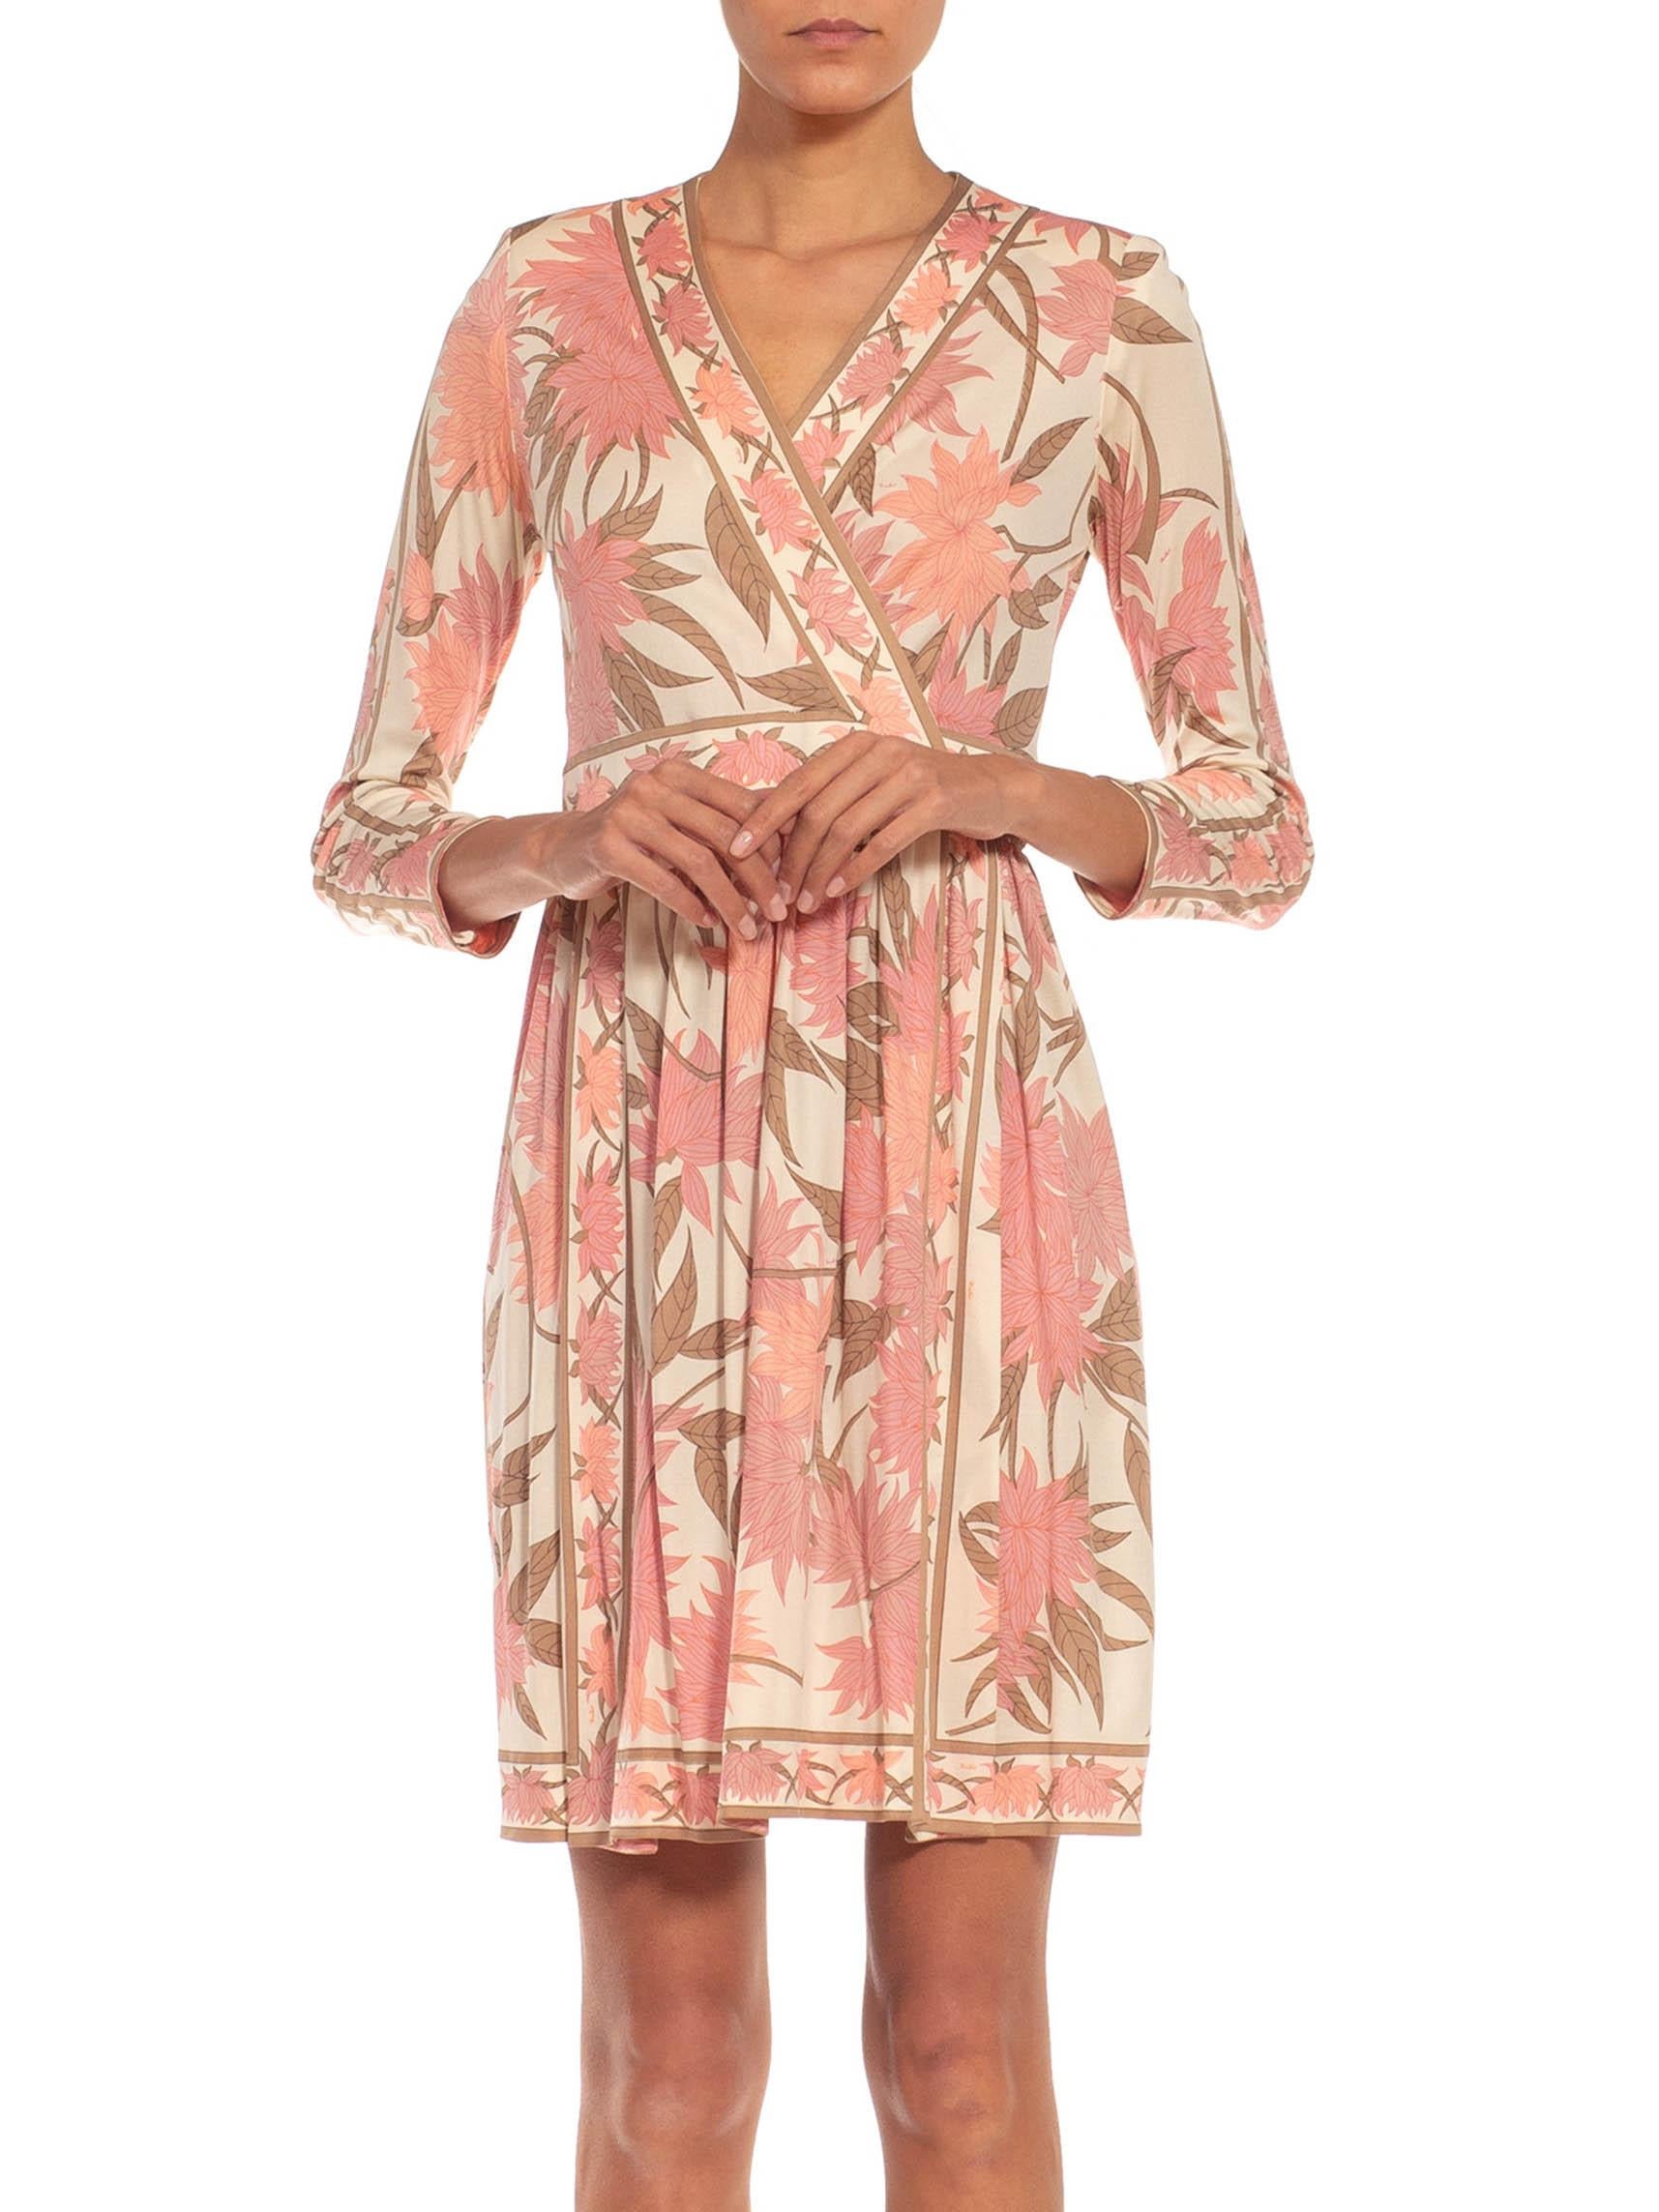 1970S EMILIO PUCCI Cream, Brown & Pink Floral Silk Rayon Blend Signed Dress In Excellent Condition For Sale In New York, NY